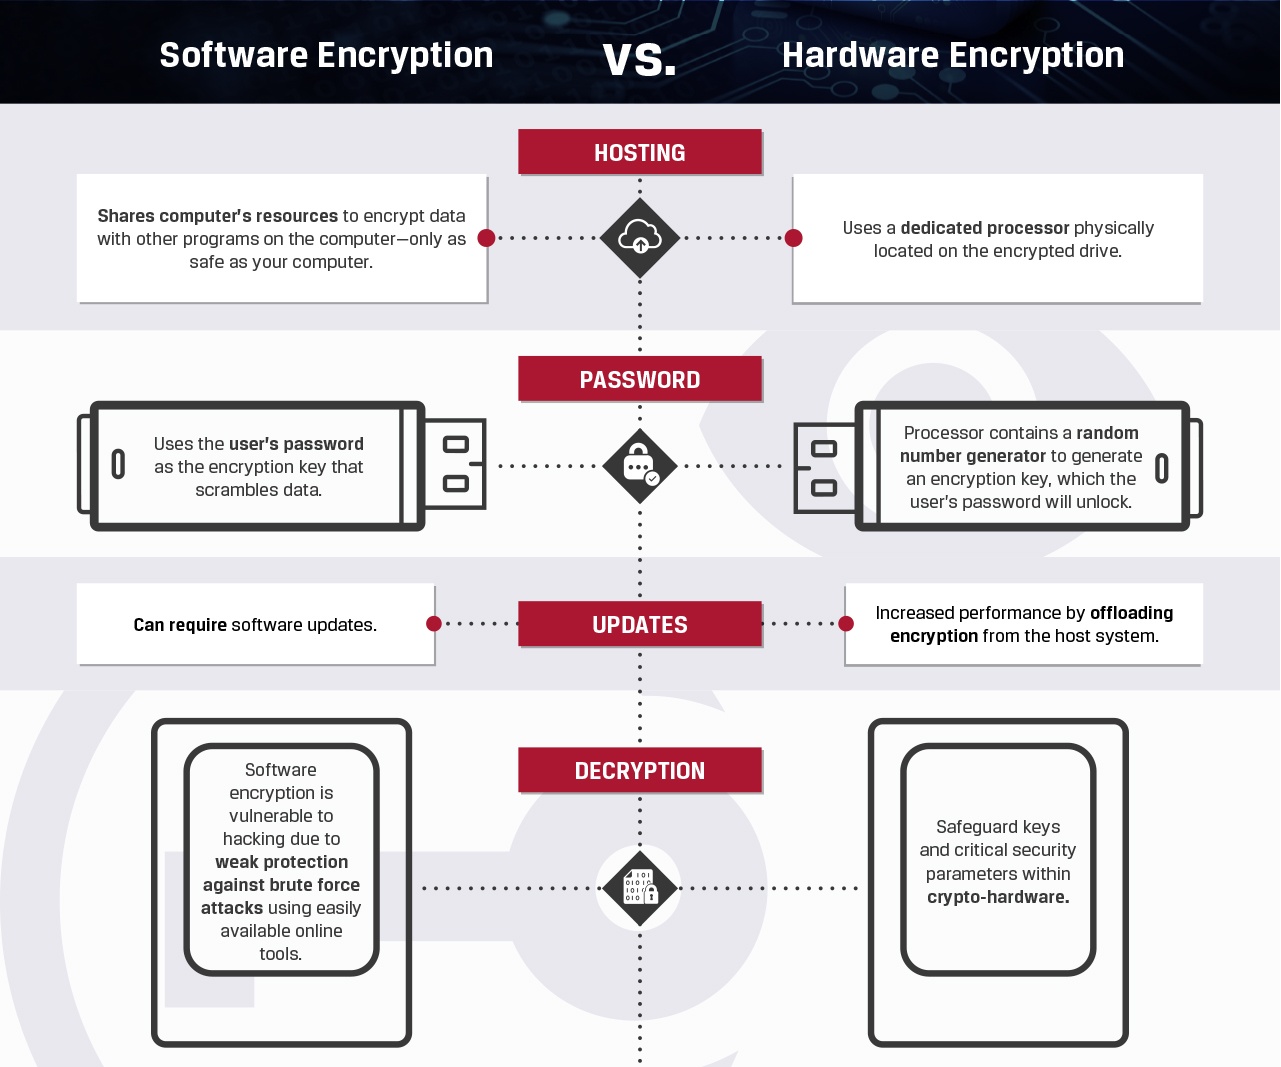 A snippet from the Software vs. hardware encryption infographic